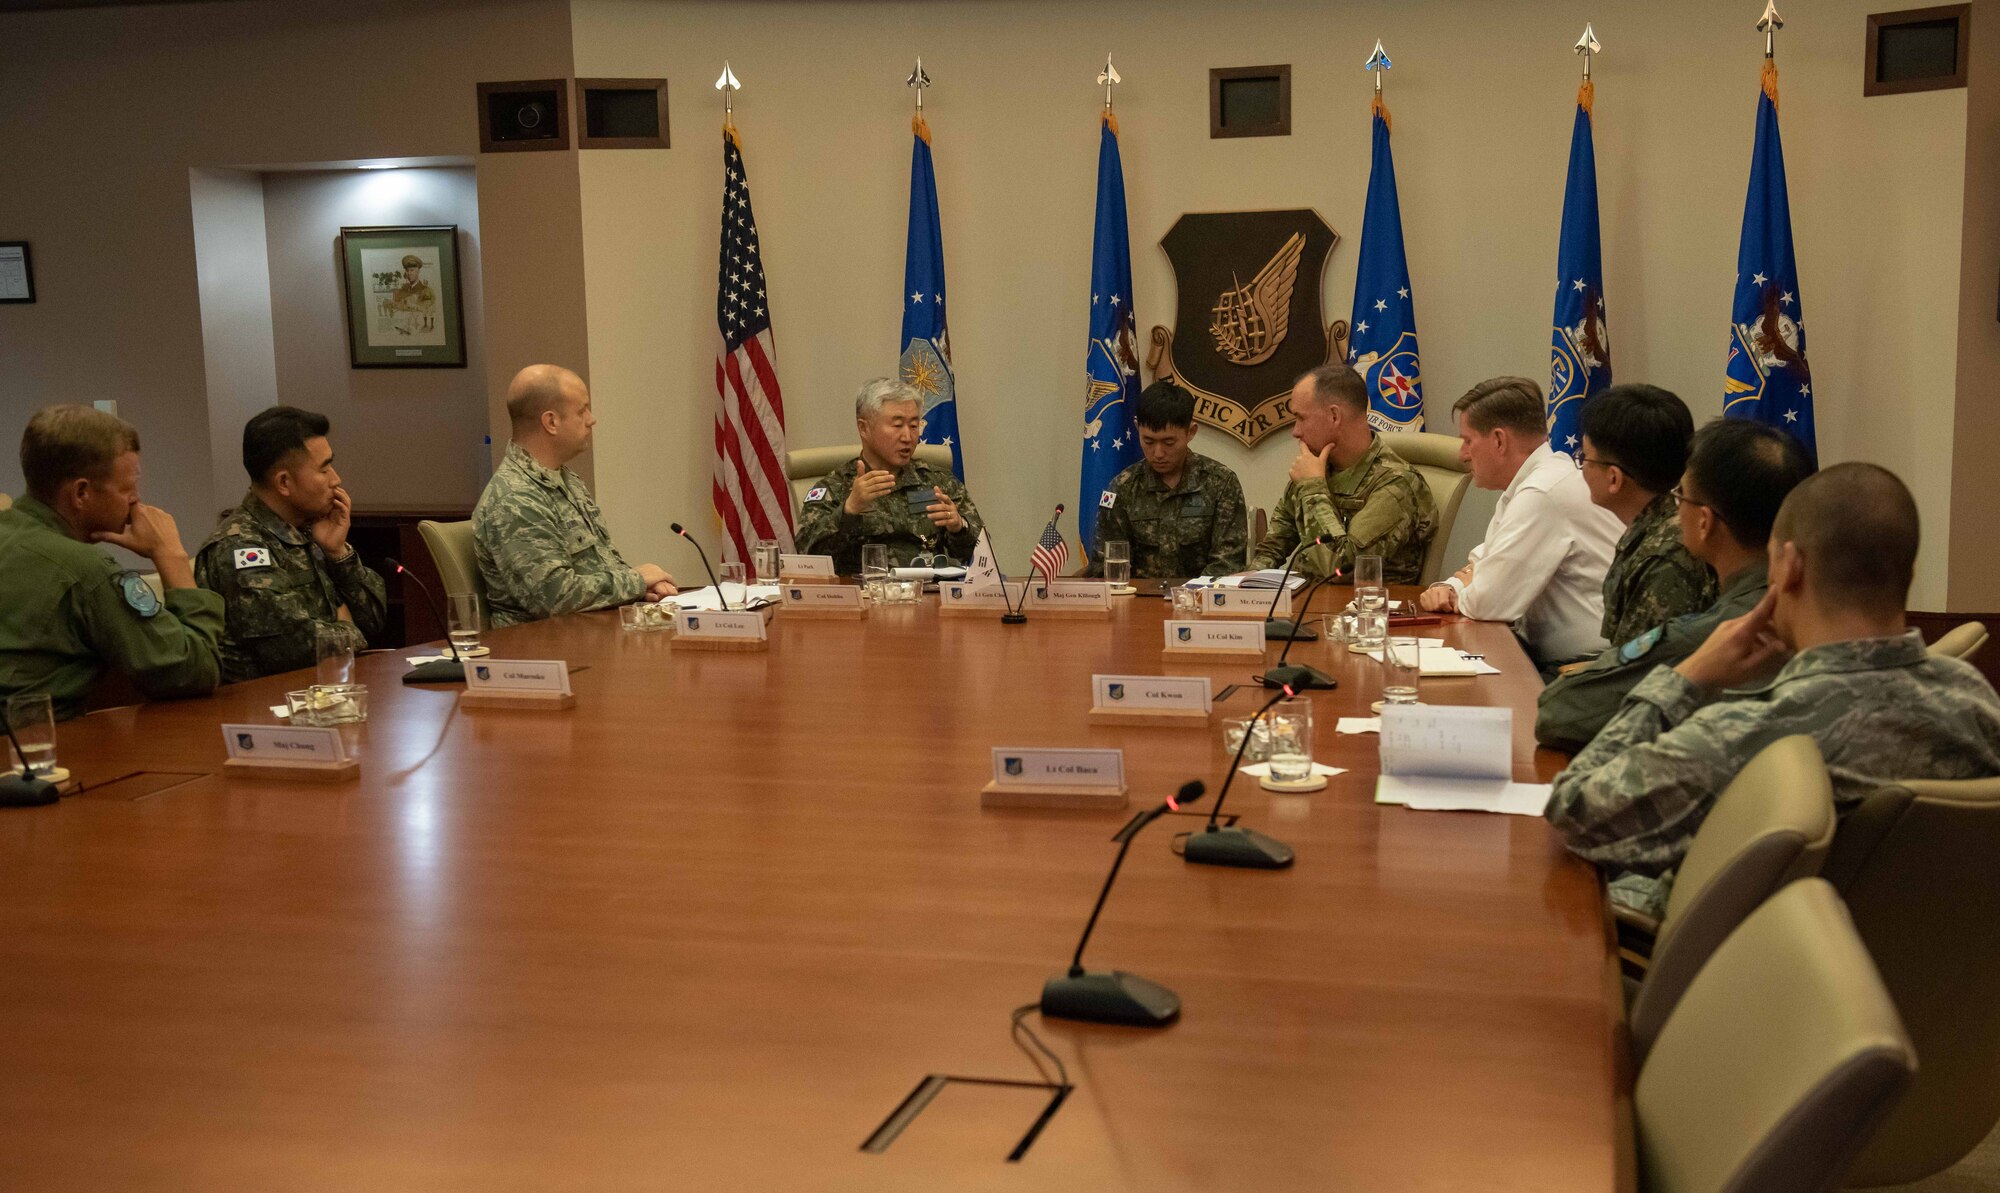 U.S. Air Force Maj. Gen. Brian M. Killough, Pacific Air Forces chief of staff, and Republic of Korea Air Force Lt. Gen. Hyun Koog Choi, ROKAF Academy superintendent, participate in a roundtable discussion at Headquarters PACAF on Joint Base Pearl Harbor-Hickam, Hawaii, Dec. 11, 2018. Choi, recently selected as the new academy superintendent, visited Indo-Pacific Command and PACAF to promote ROK and U.S. cooperation, discuss issues related to interoperability and receive a PACAF area of responsibility immersion. The visit highlighted the enduring partnership and friendship between the two nations and their commitment to a free and open Indo-Pacific. (U.S. Air Force Photo by Staff Sgt. Daniel Robles)